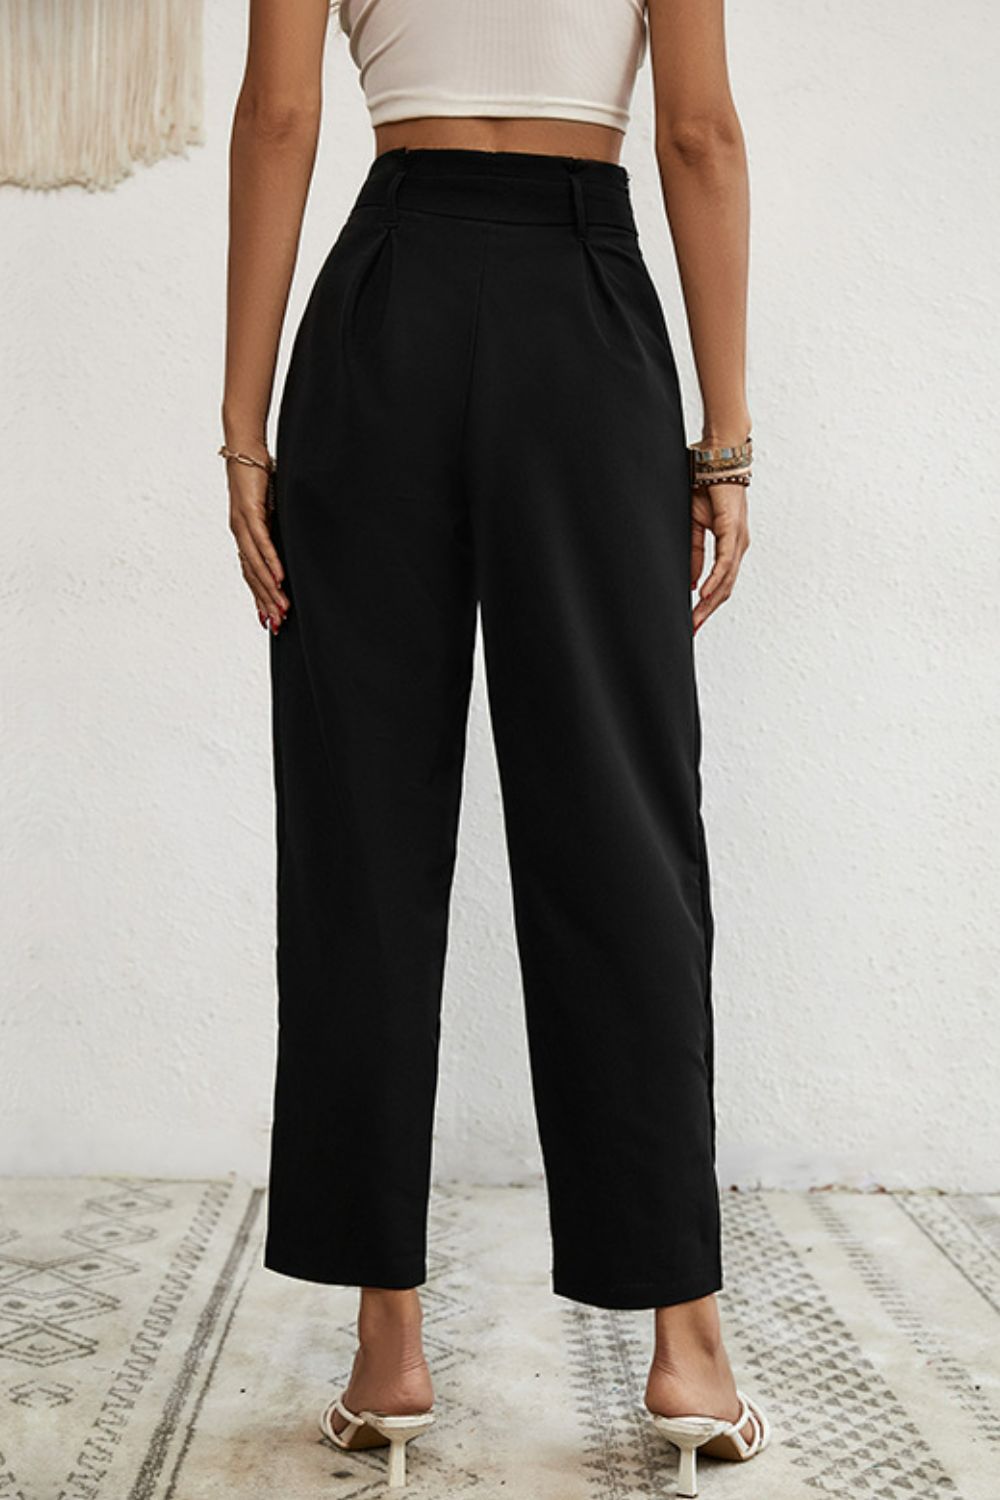 Buttoned Tie-Waist Cropped Pants - Pants - FITGGINS